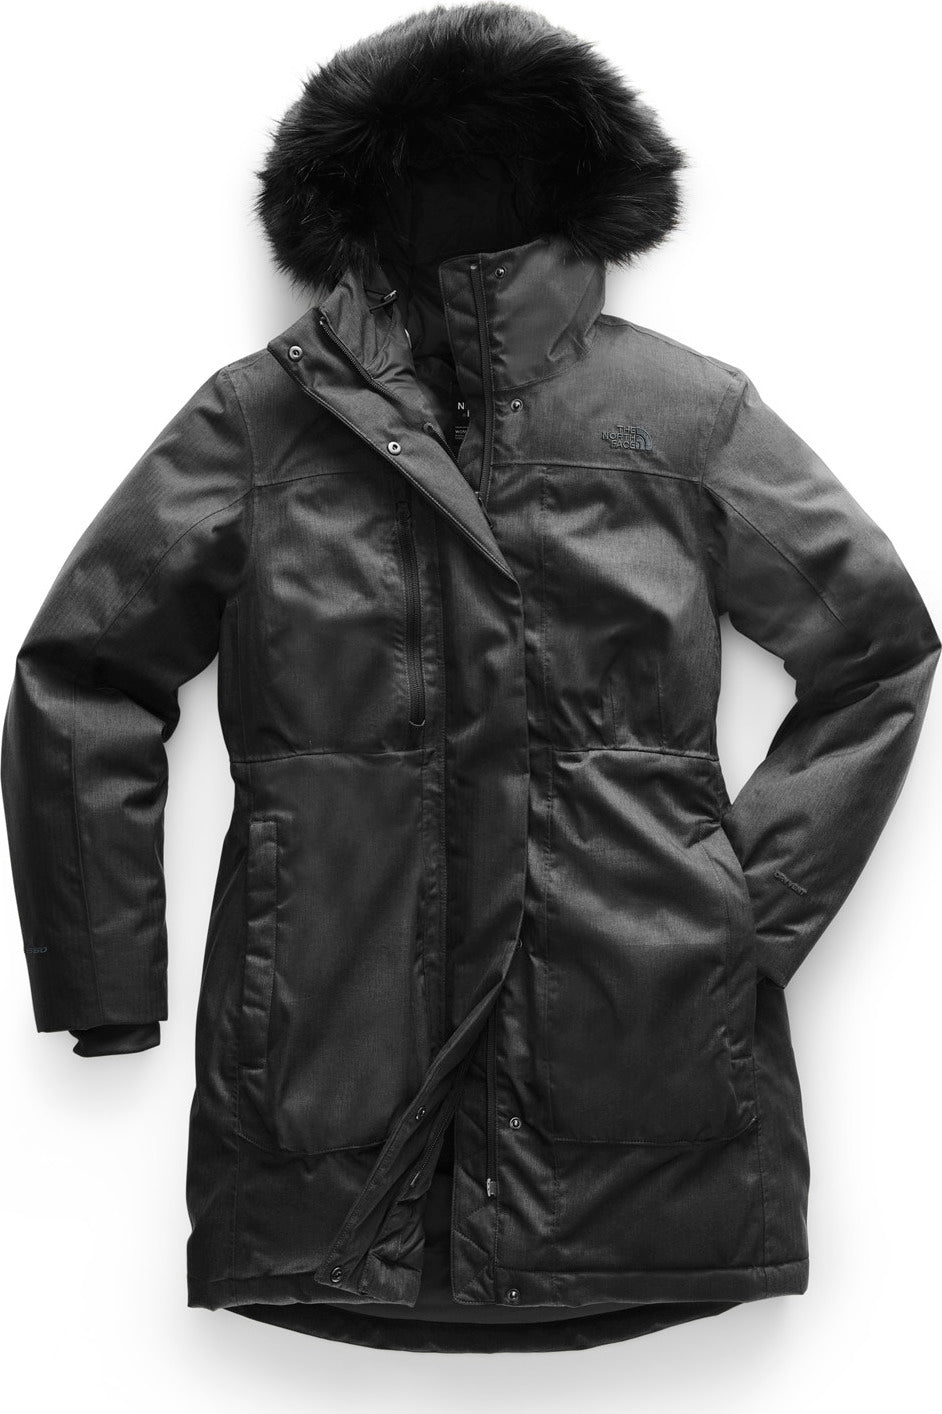 north face downtown parka